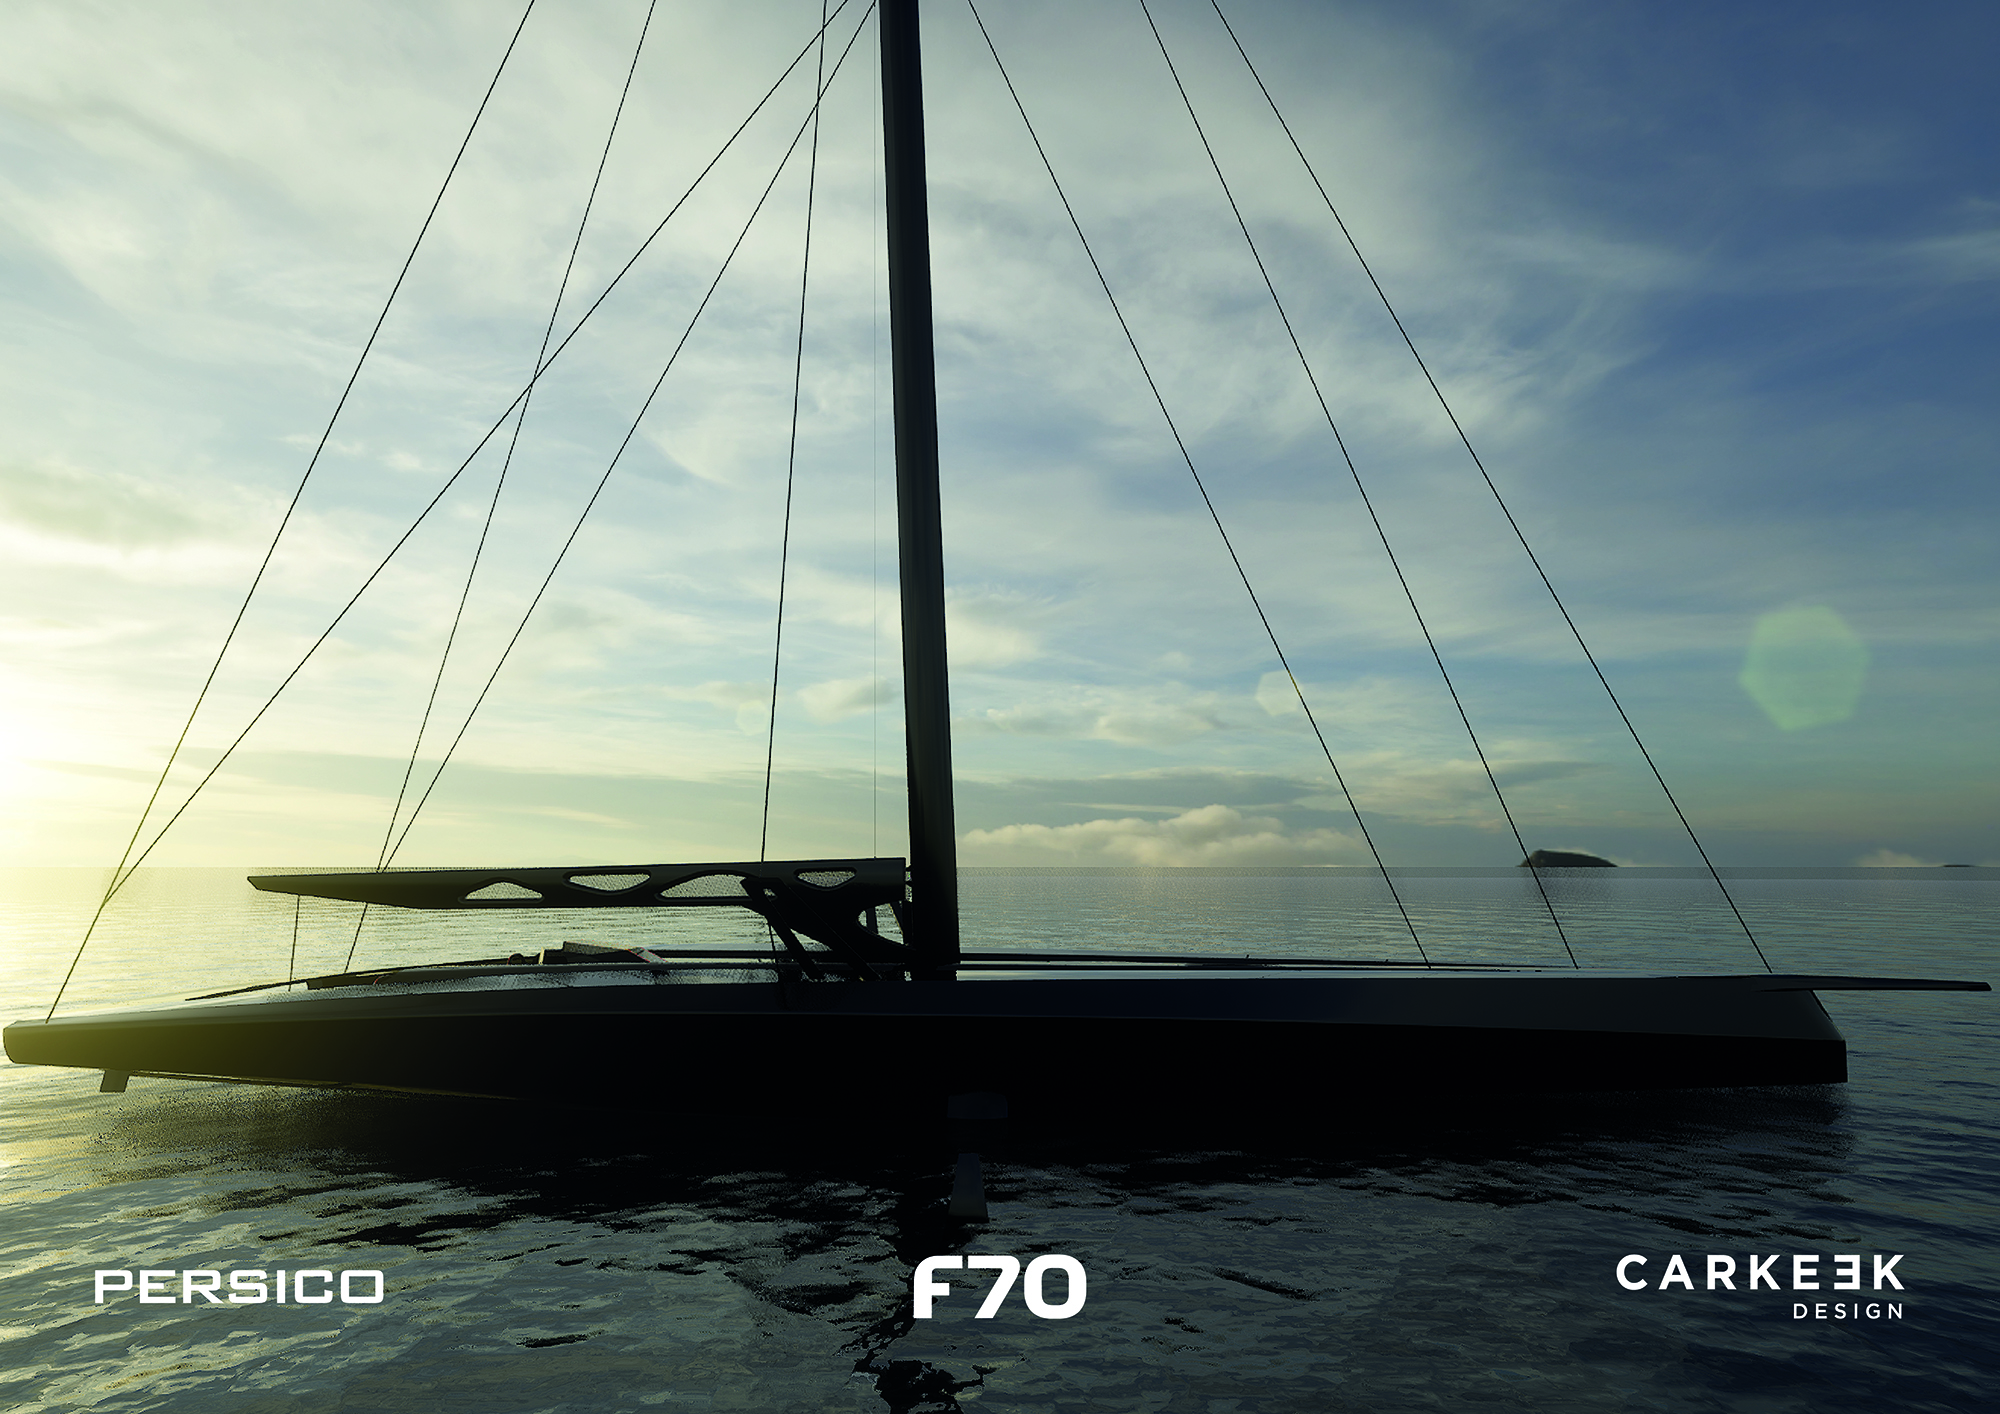 Persico Marine and Carkeek Design Partners introduce F 70 full-foiling day sailer-racer